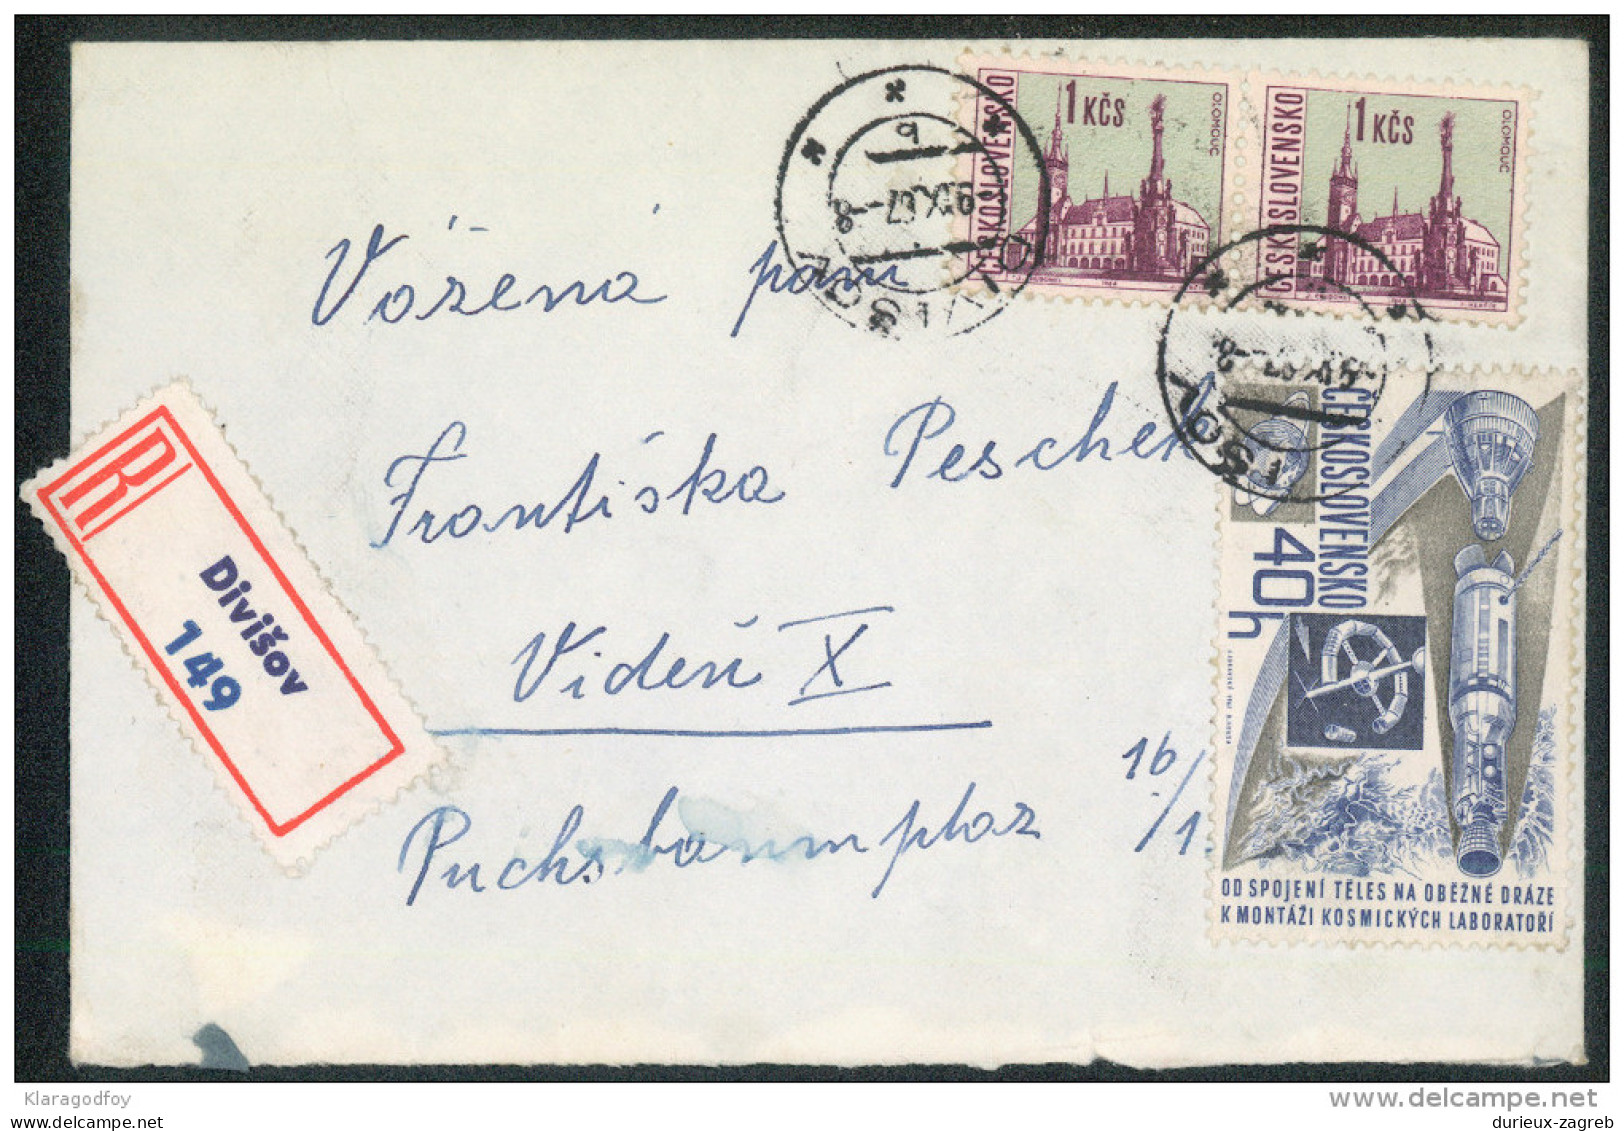 Czechoslovakia Letter Cover Registered Travelled 1967 Bb161028 - Covers & Documents